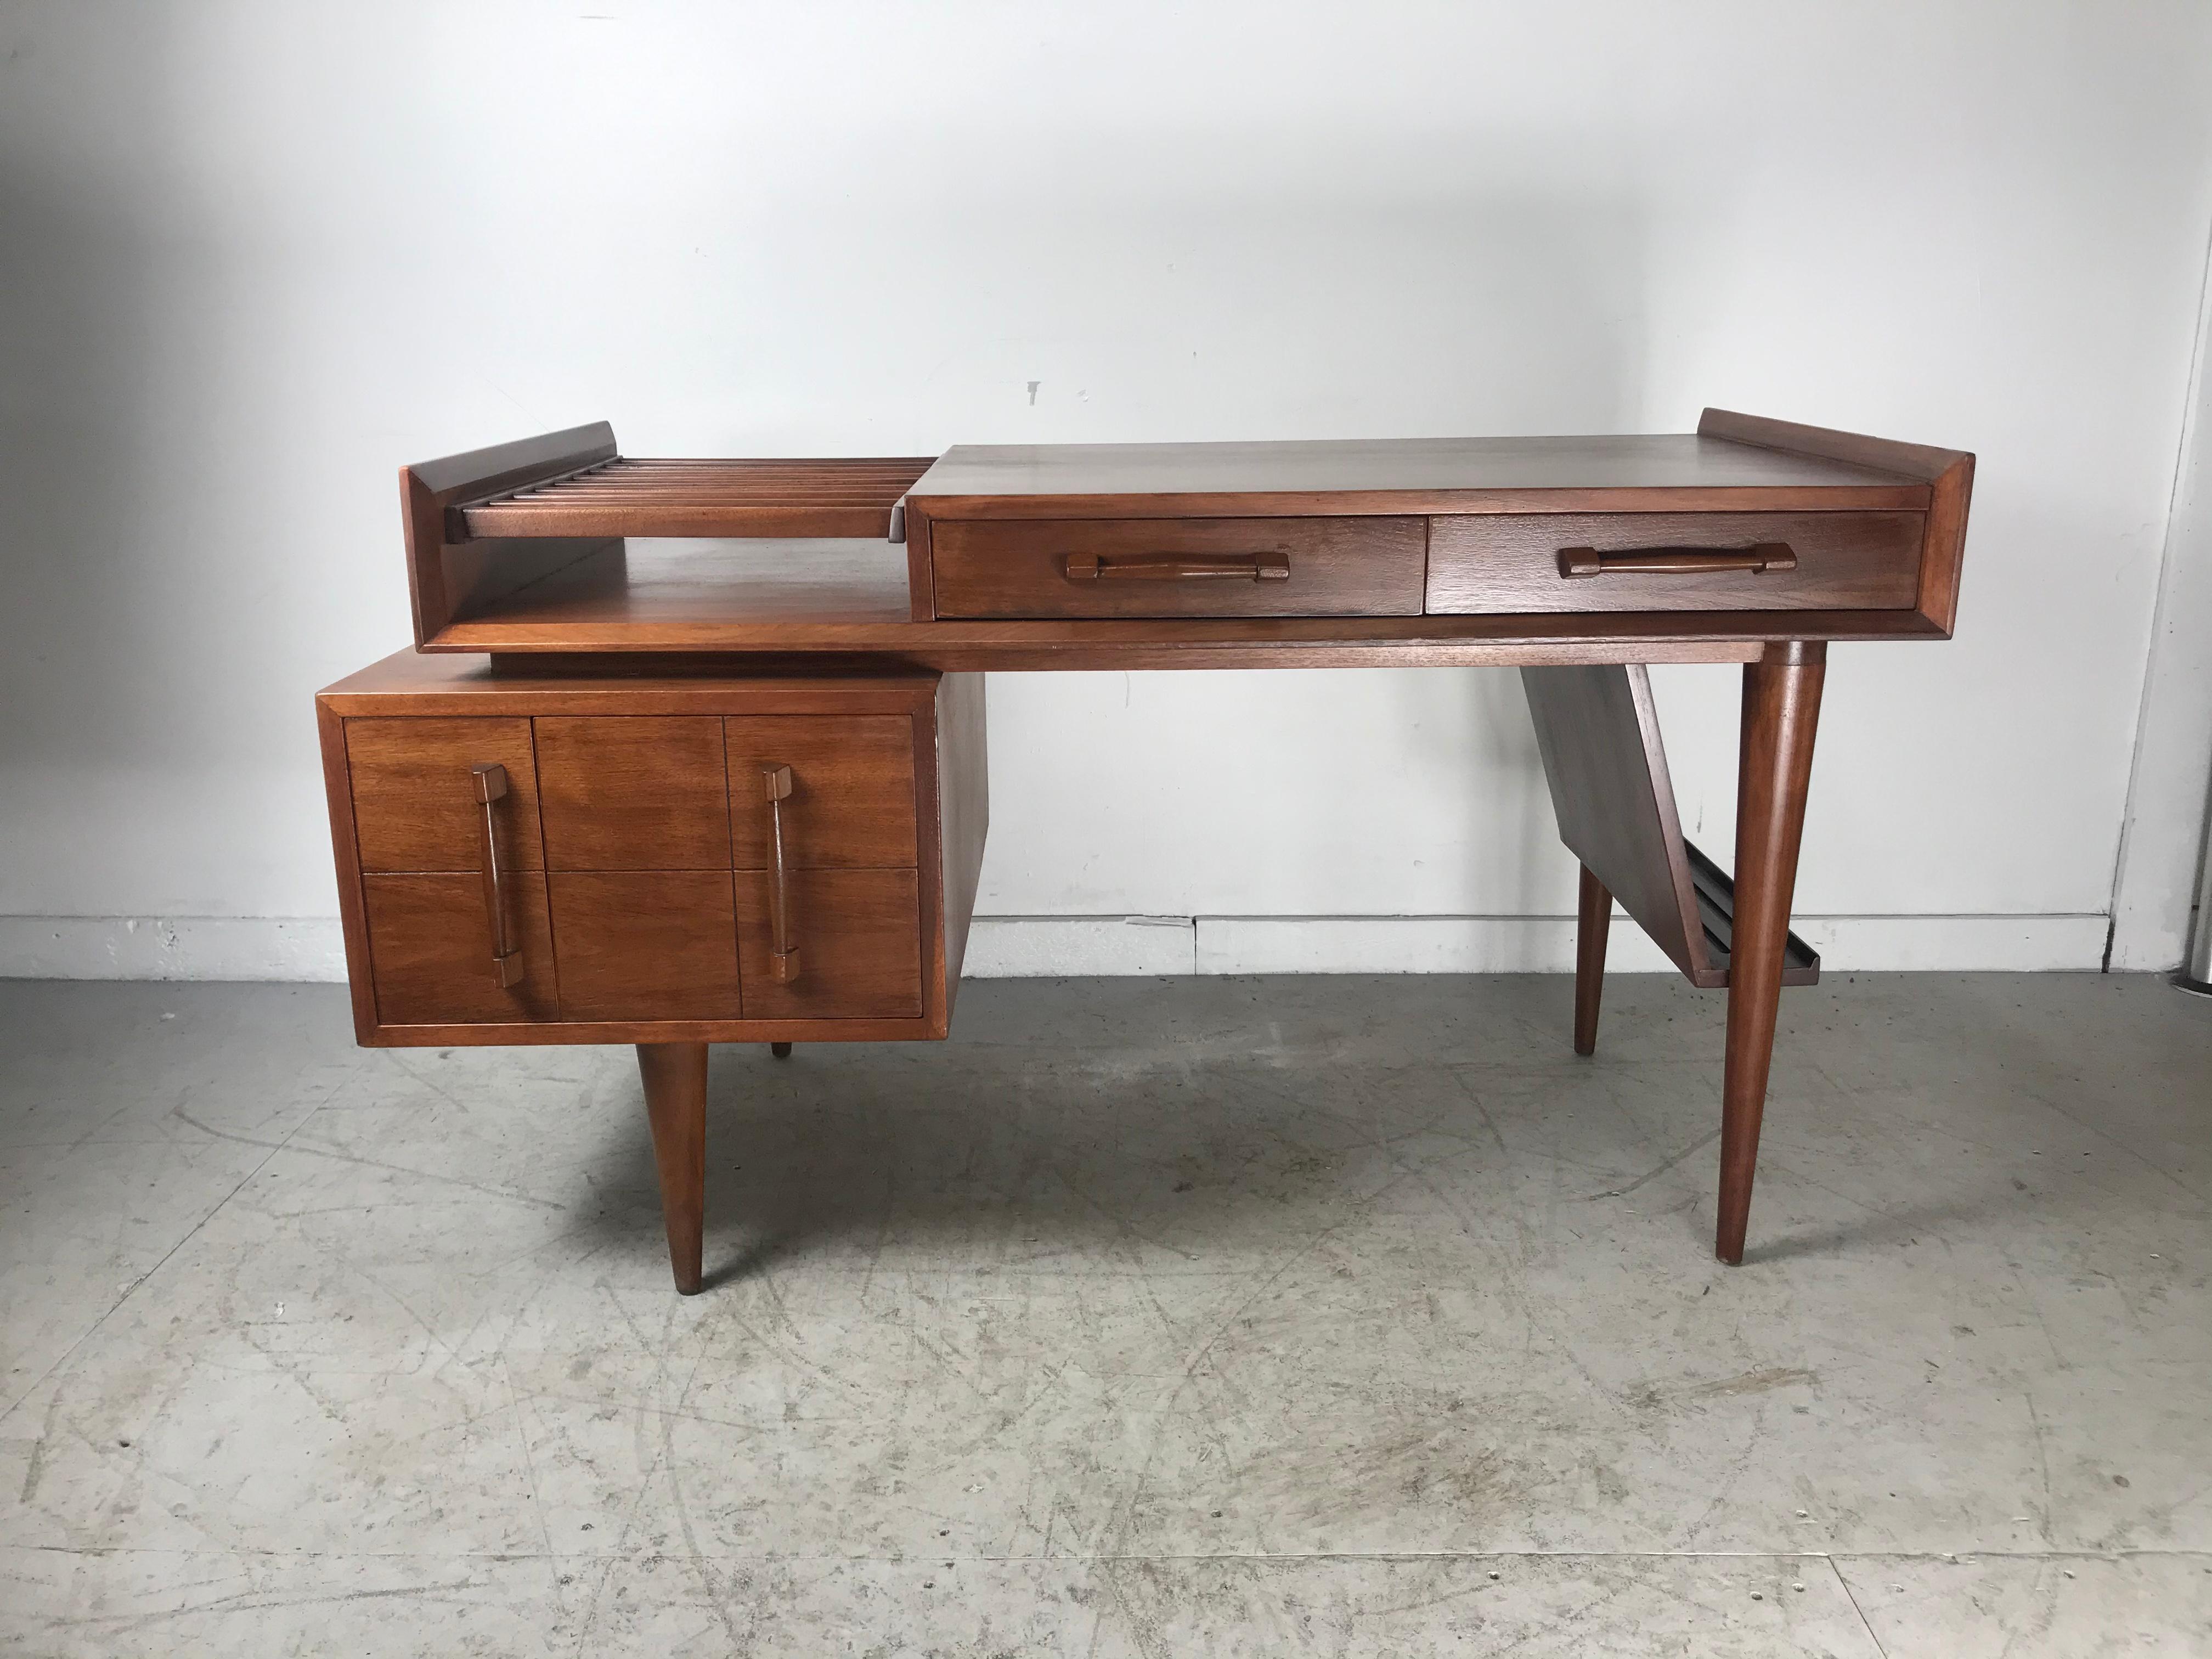 Classic Mid-Century Modern design. This piece is spectacular, an absolutely beautiful desk. Very unique styling, file drawer and side easel, it was produced by Sherman Bertram in the early 1950s. The solid walnut construction has a beautiful rich